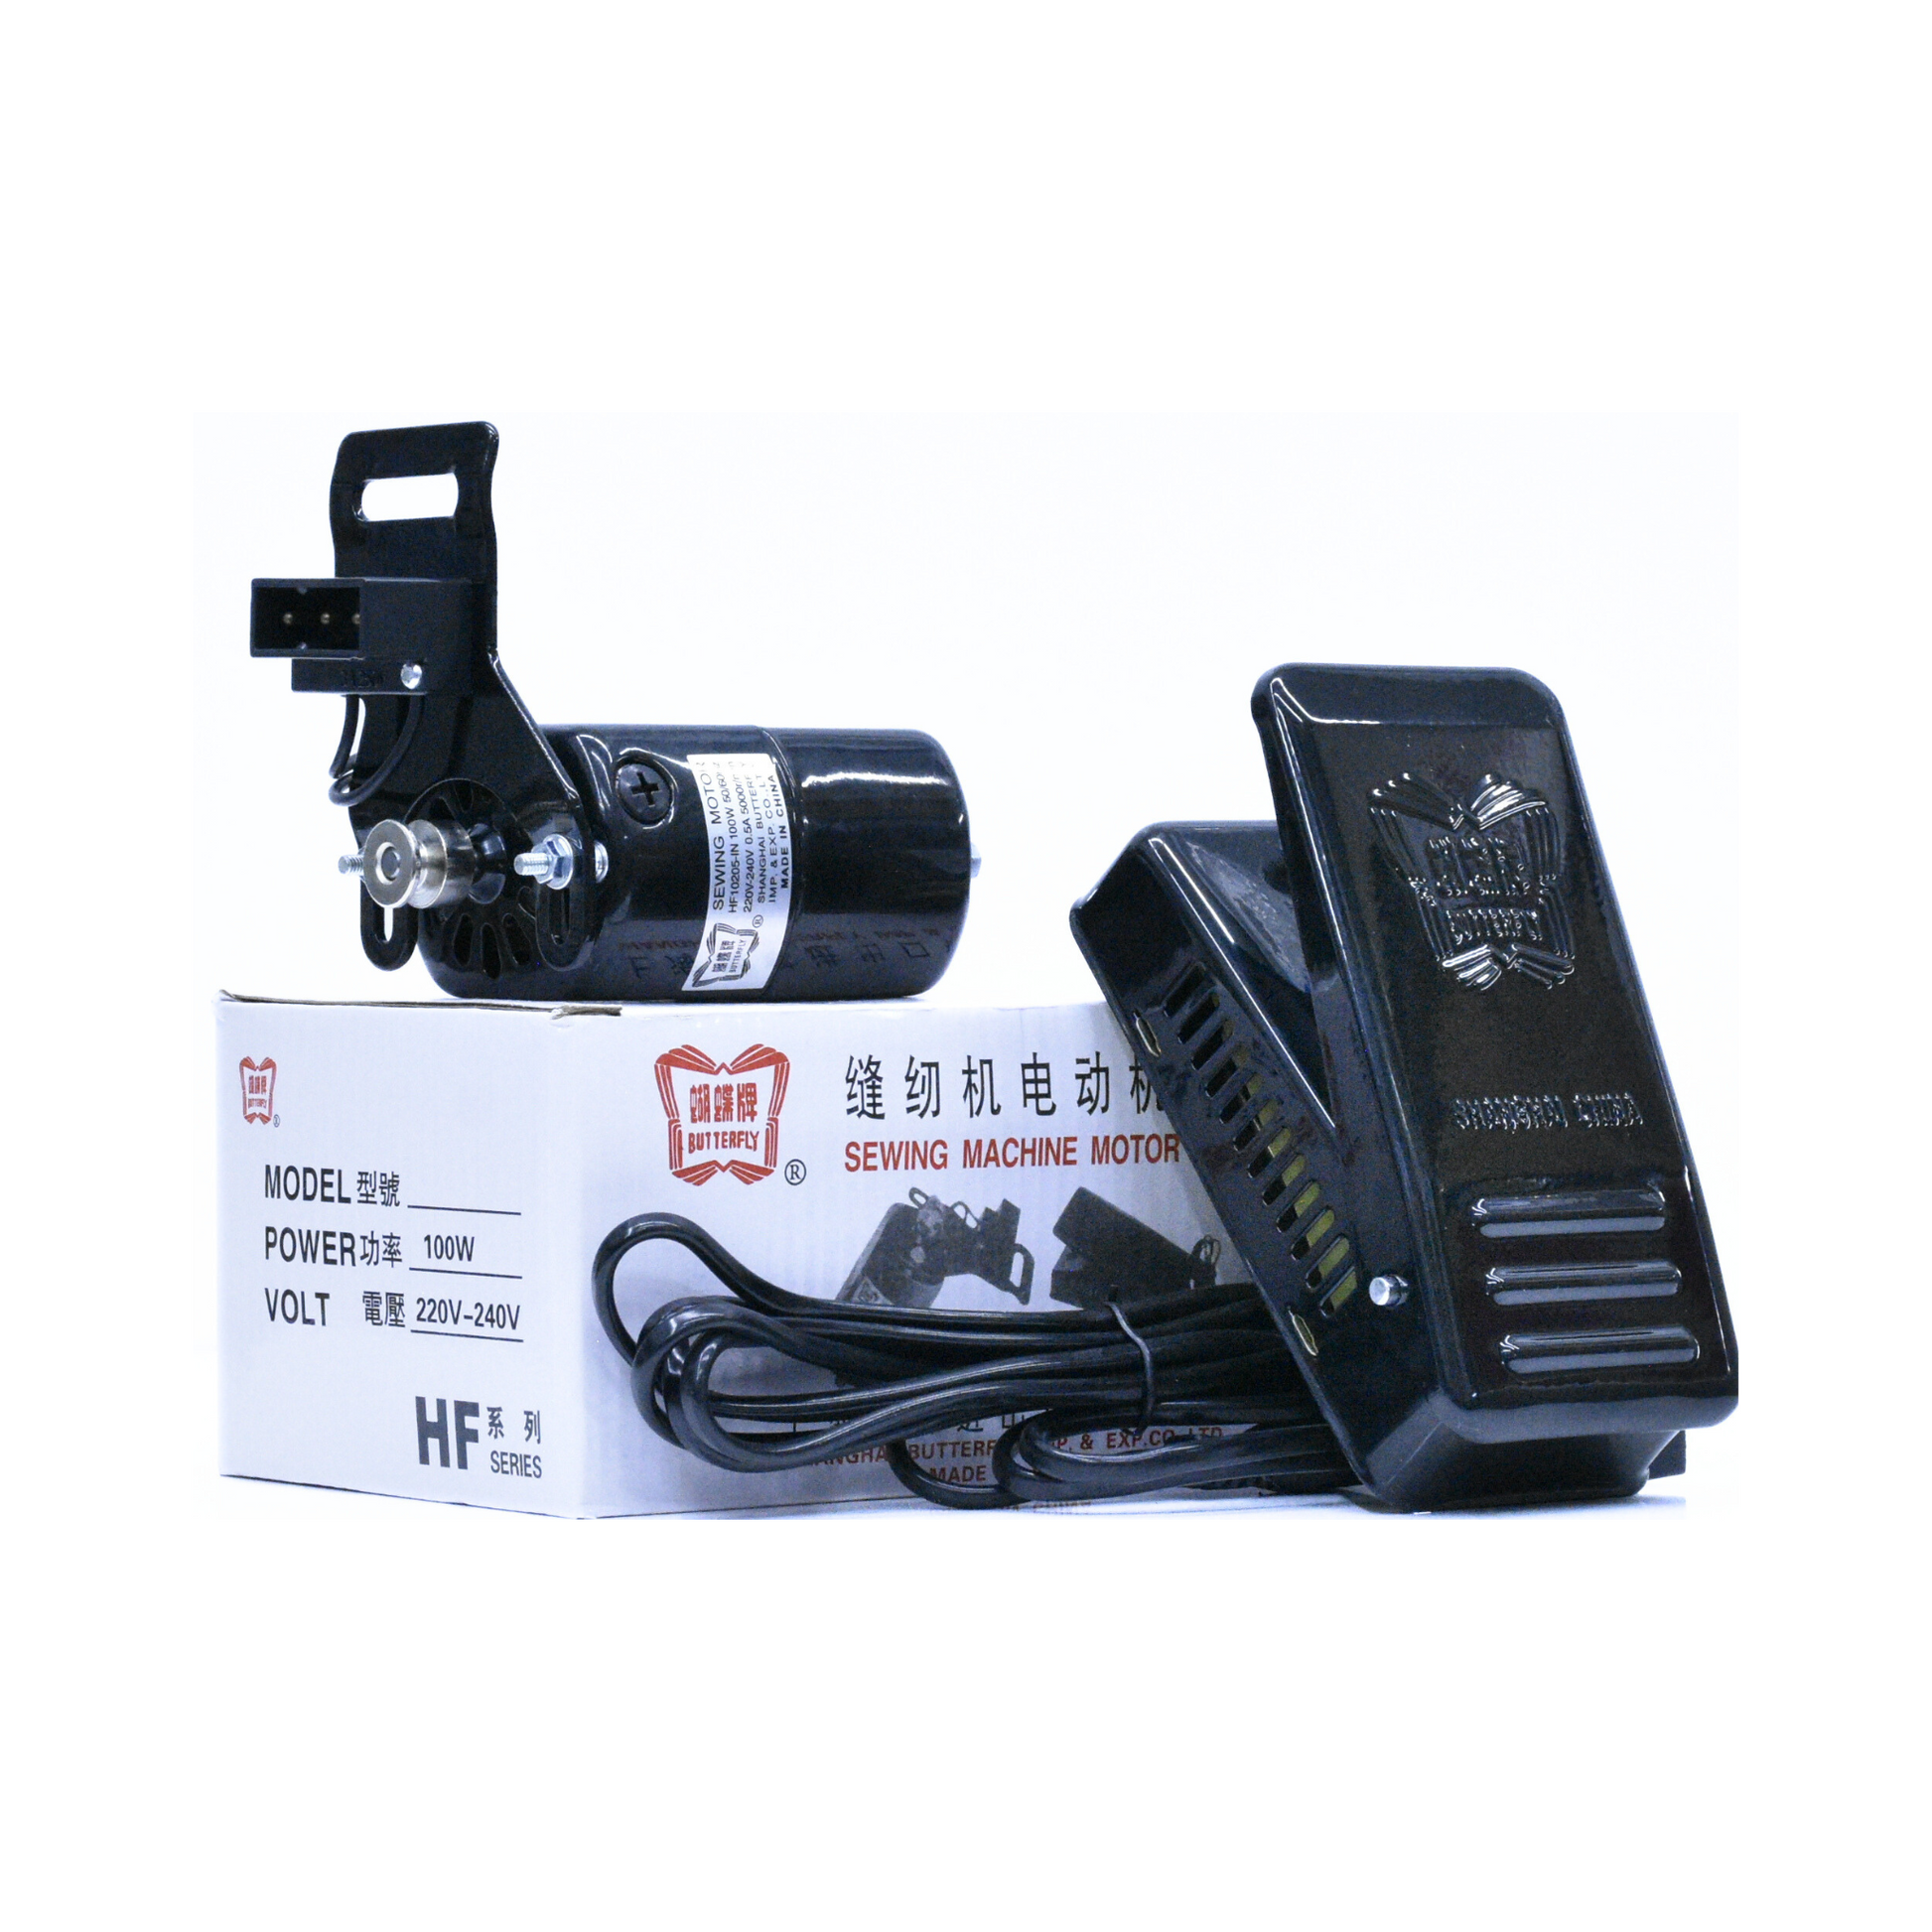 Butterfly - Sewing machine motor and controller - Black - Front view